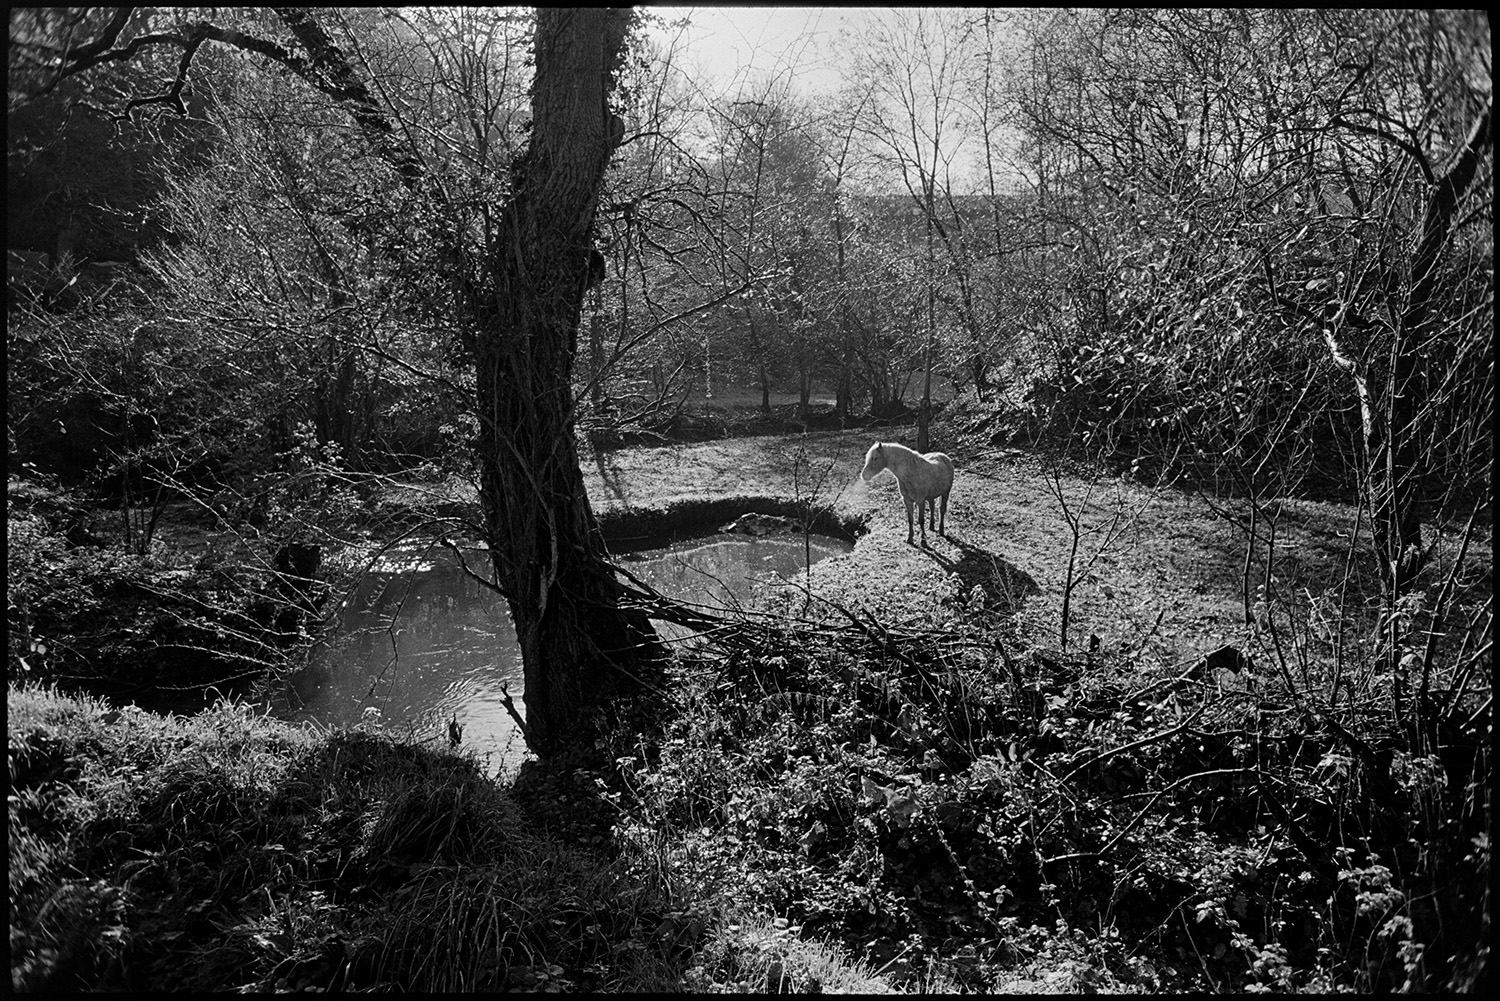 Early morning sun on stream and trees, grazing horse.
[A horse standing by a woodland pond, in early morning sunlight, at Millhams, Dolton.]